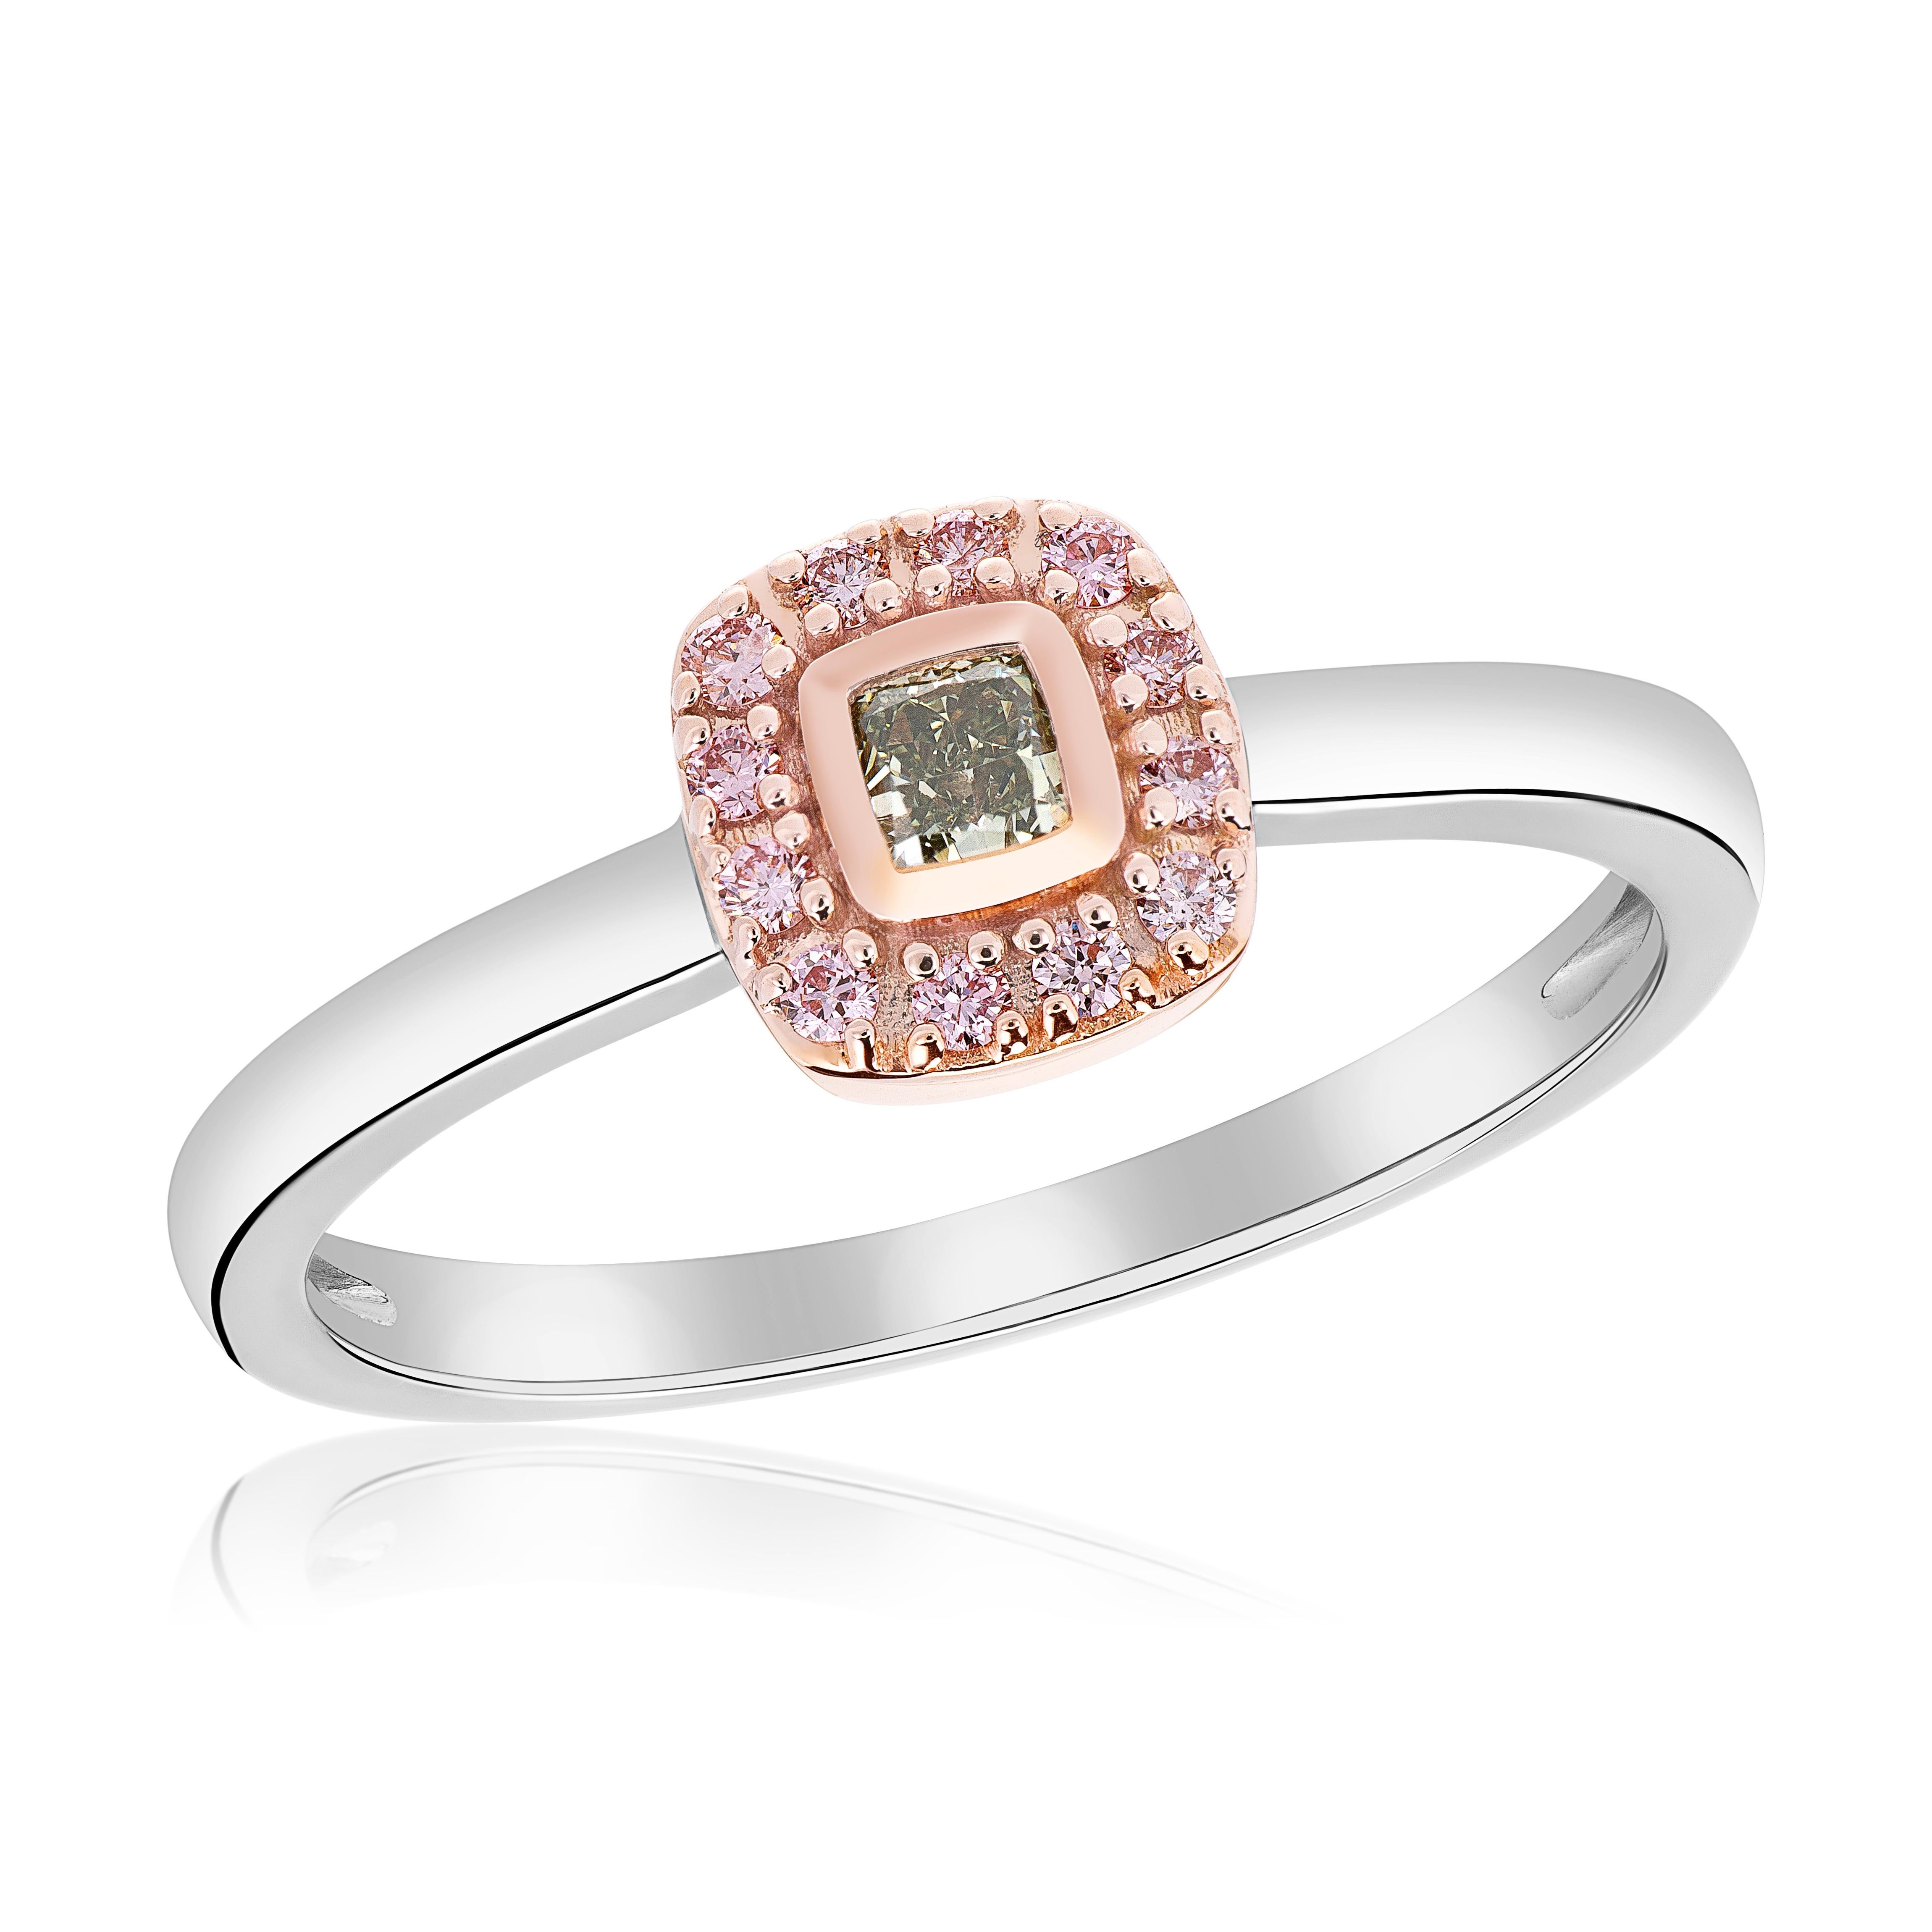 Make a captivating statement with this exquisite stackable halo ring featuring a mesmerizing 0.12-carat fancy grayish green cushion diamond. The distinctive color and unique charm of the cushion diamond make it a truly remarkable centerpiece. Adding